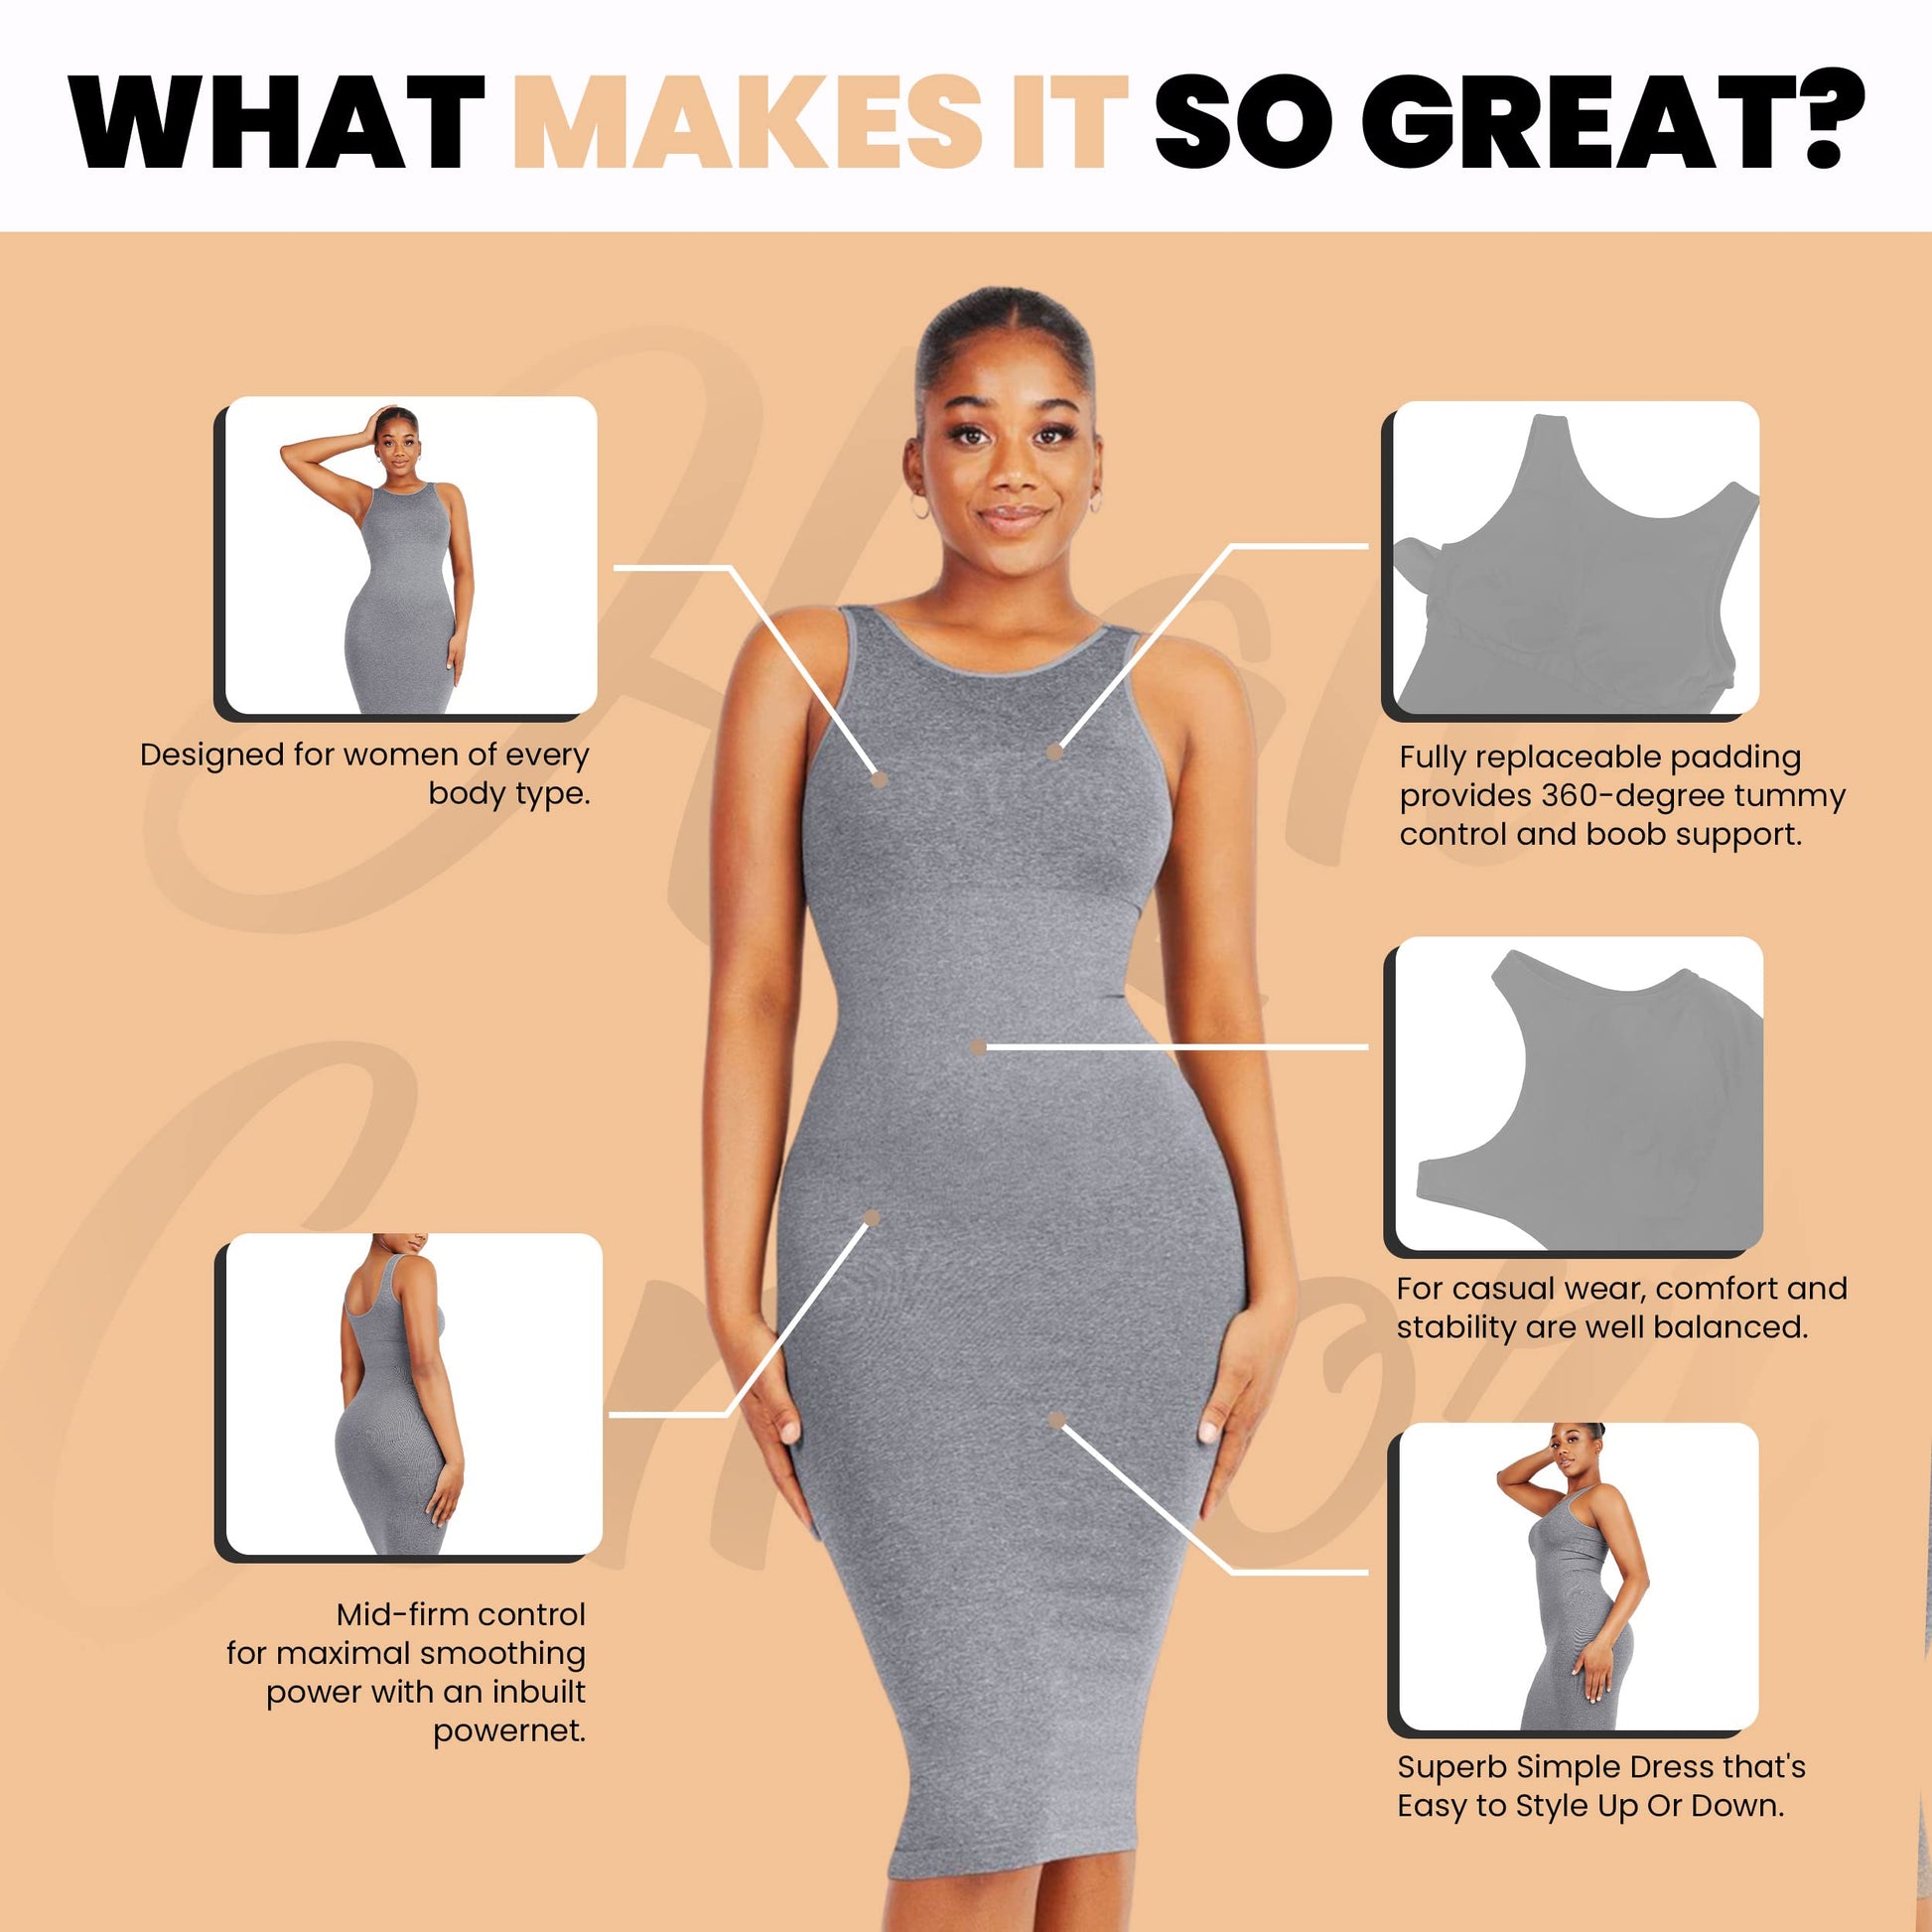 Best Shapewear for Smoothing Under Every Outfit